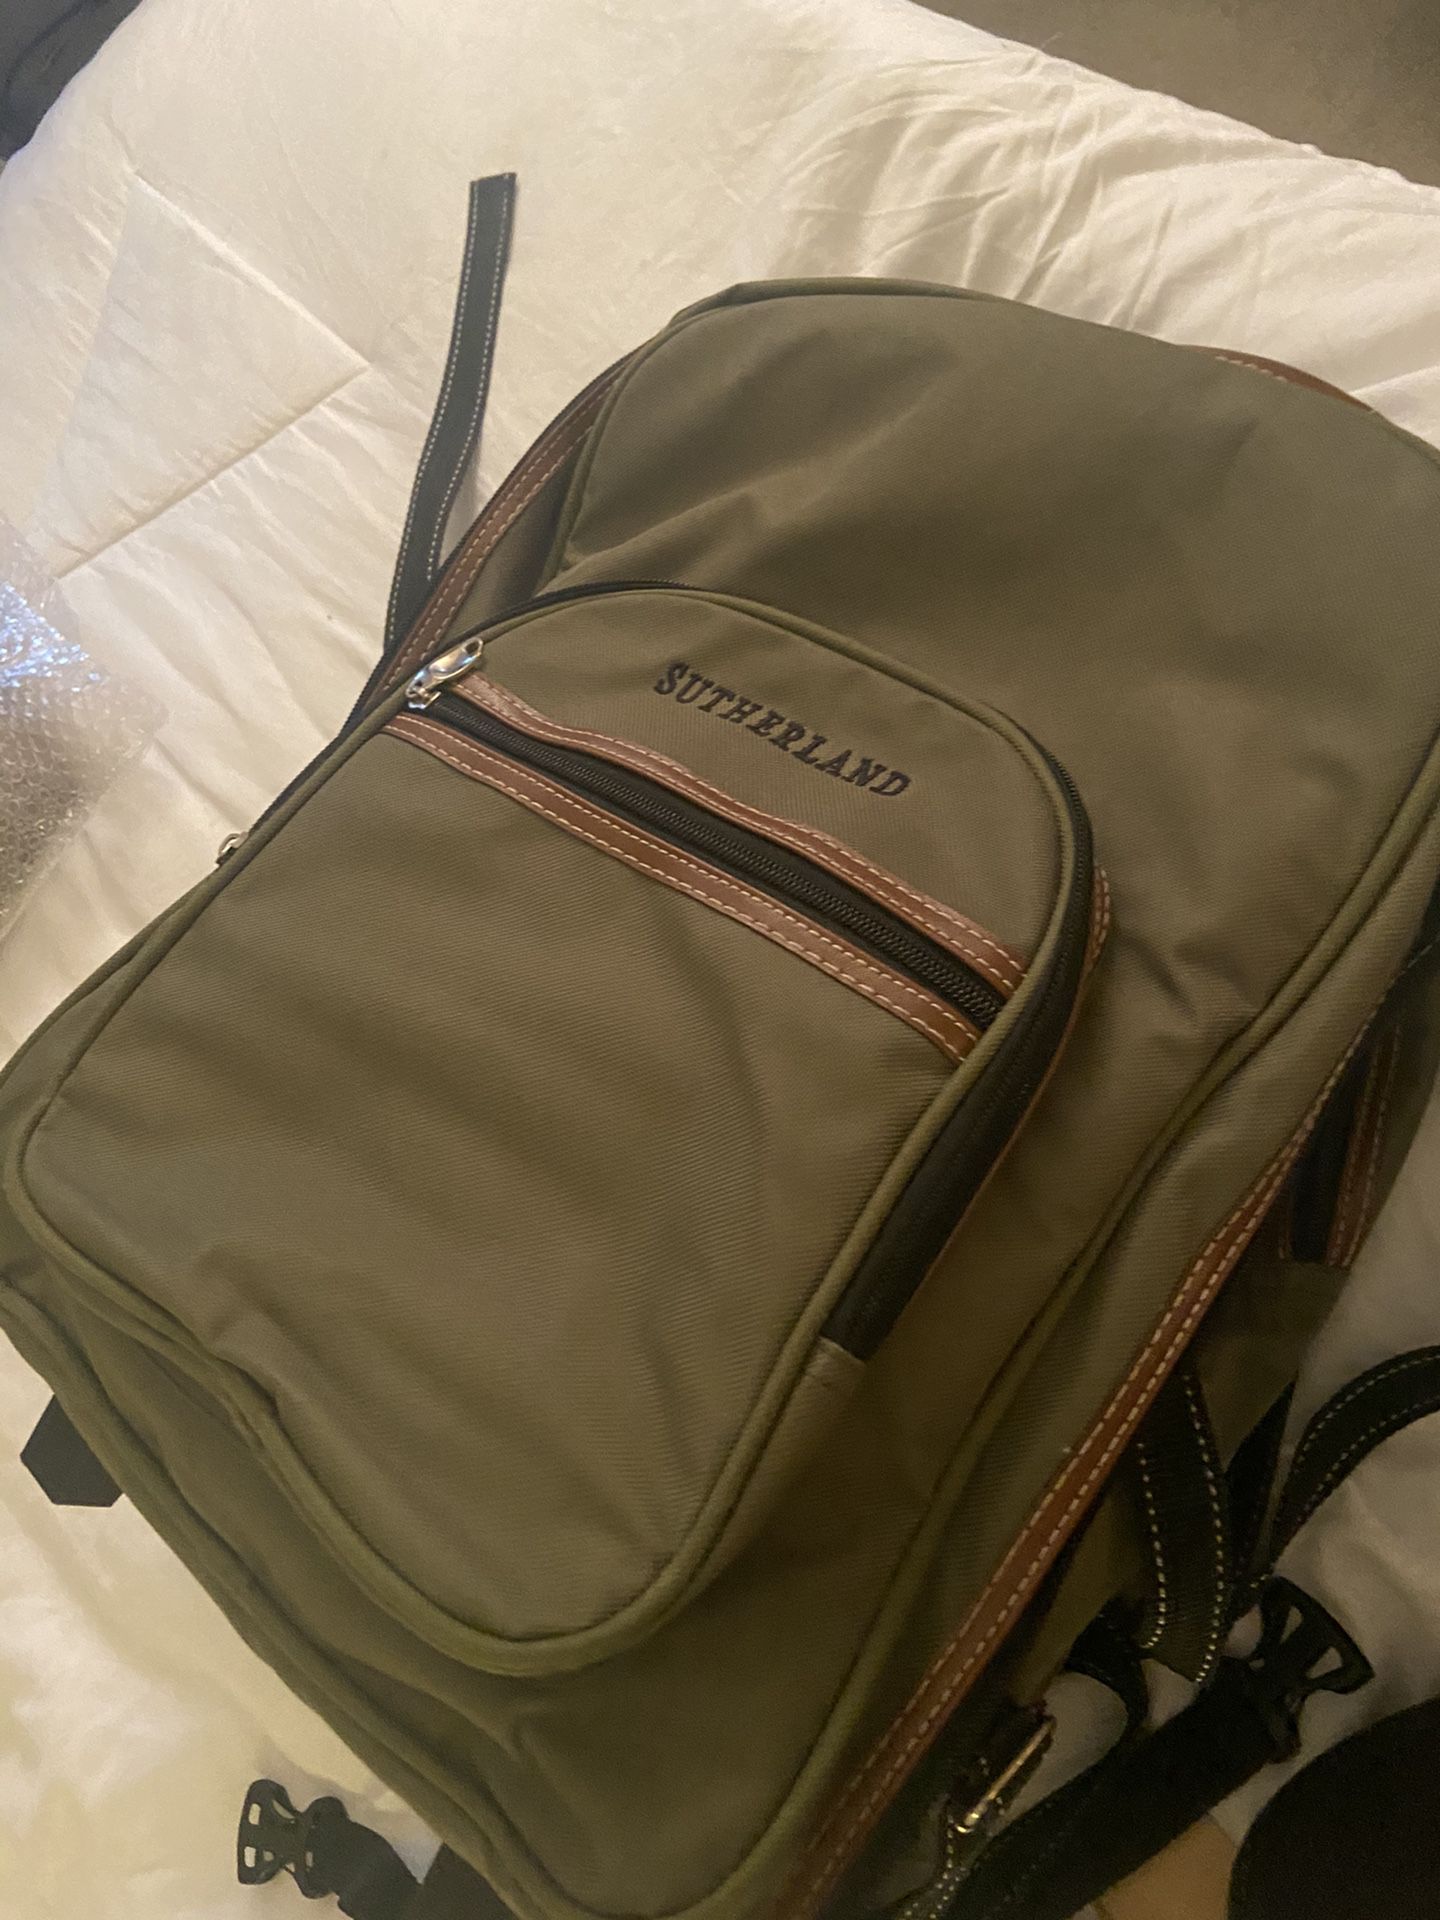 Picnic Backpack — Never Used!